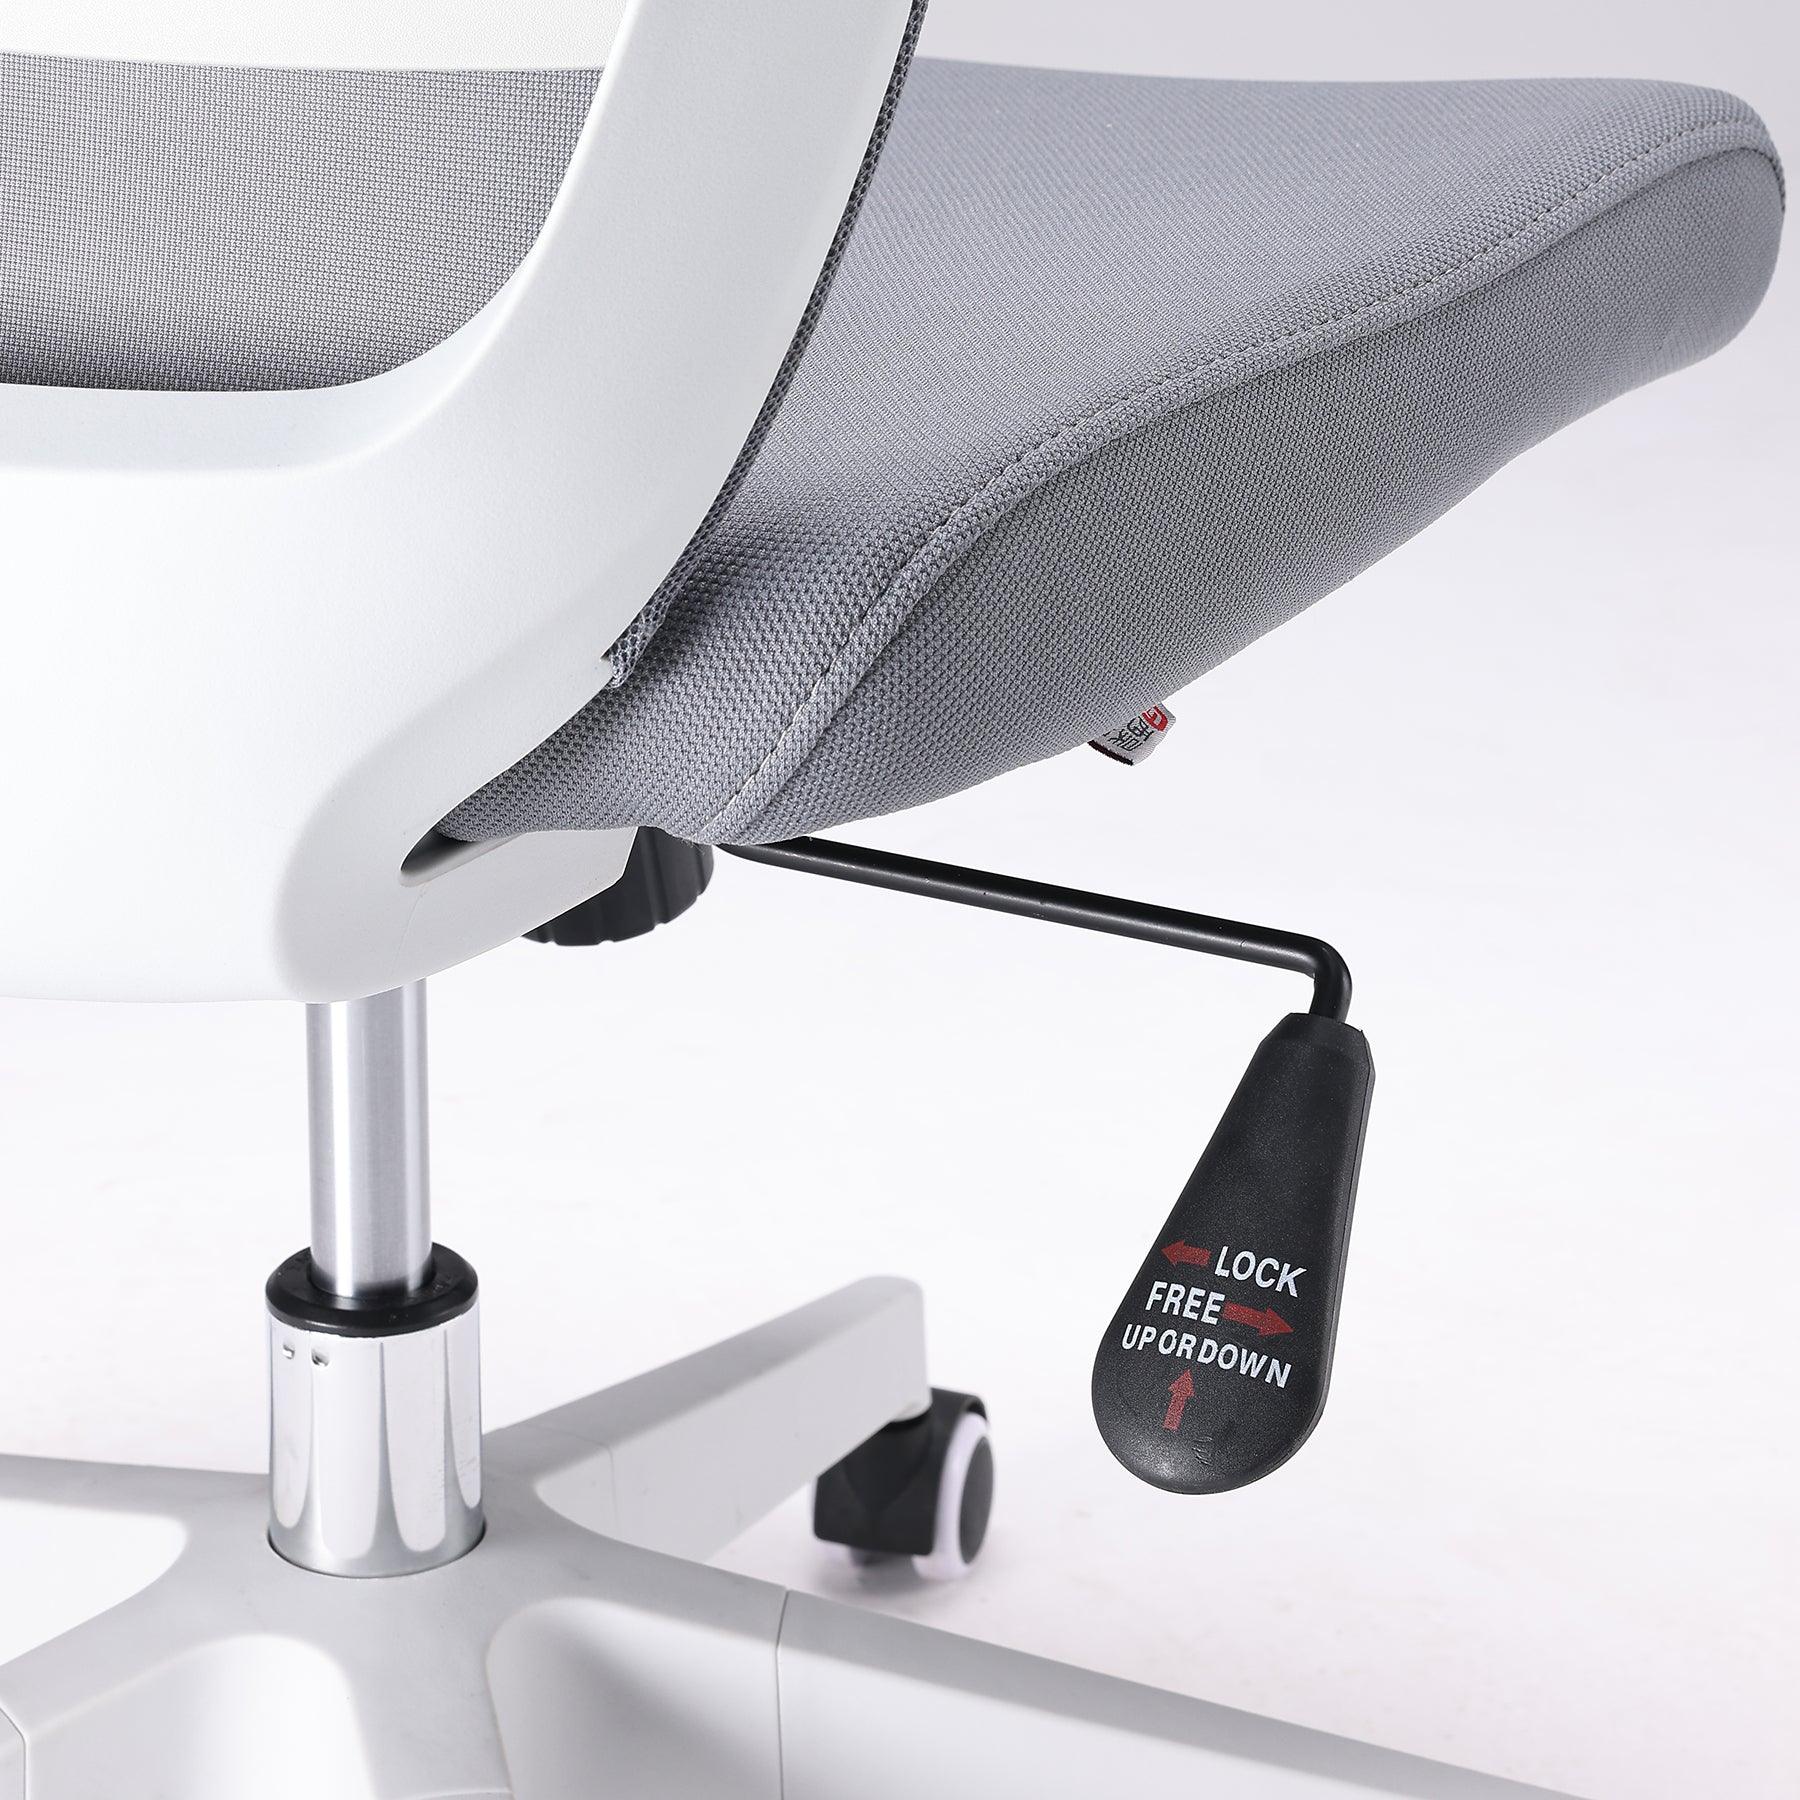 SIHOO M18 Office Chair Review 